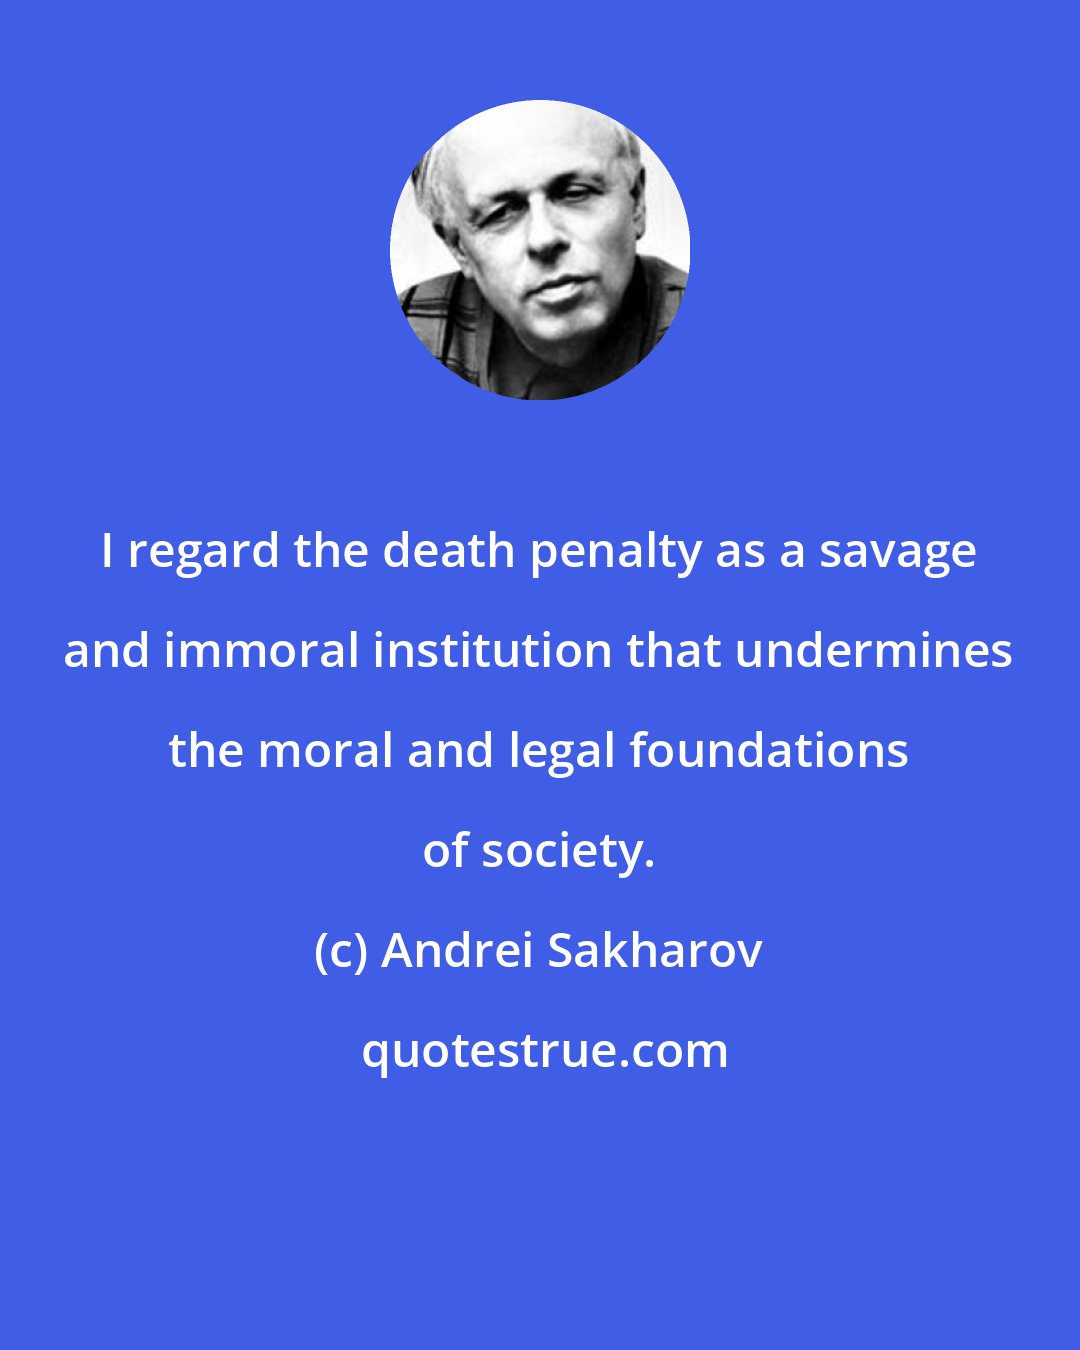 Andrei Sakharov: I regard the death penalty as a savage and immoral institution that undermines the moral and legal foundations of society.